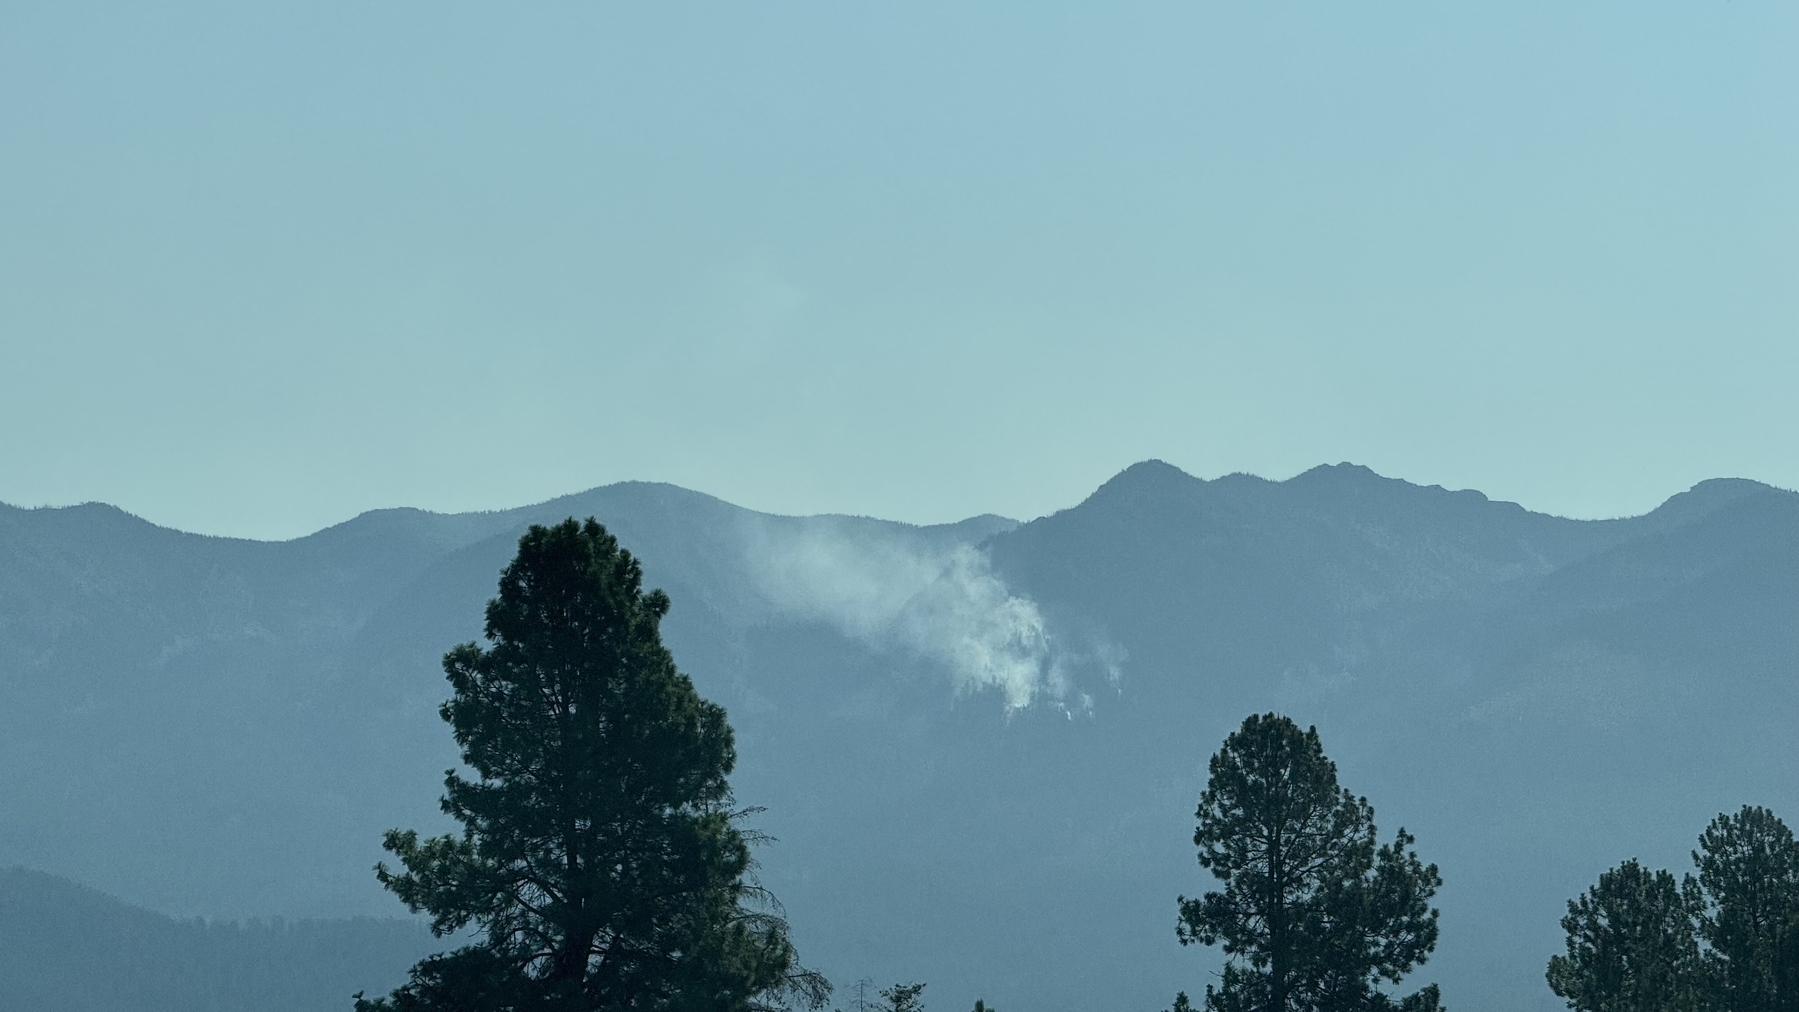 A mountain range in the mid distance with a number of smoking plumes up high on the mountain.